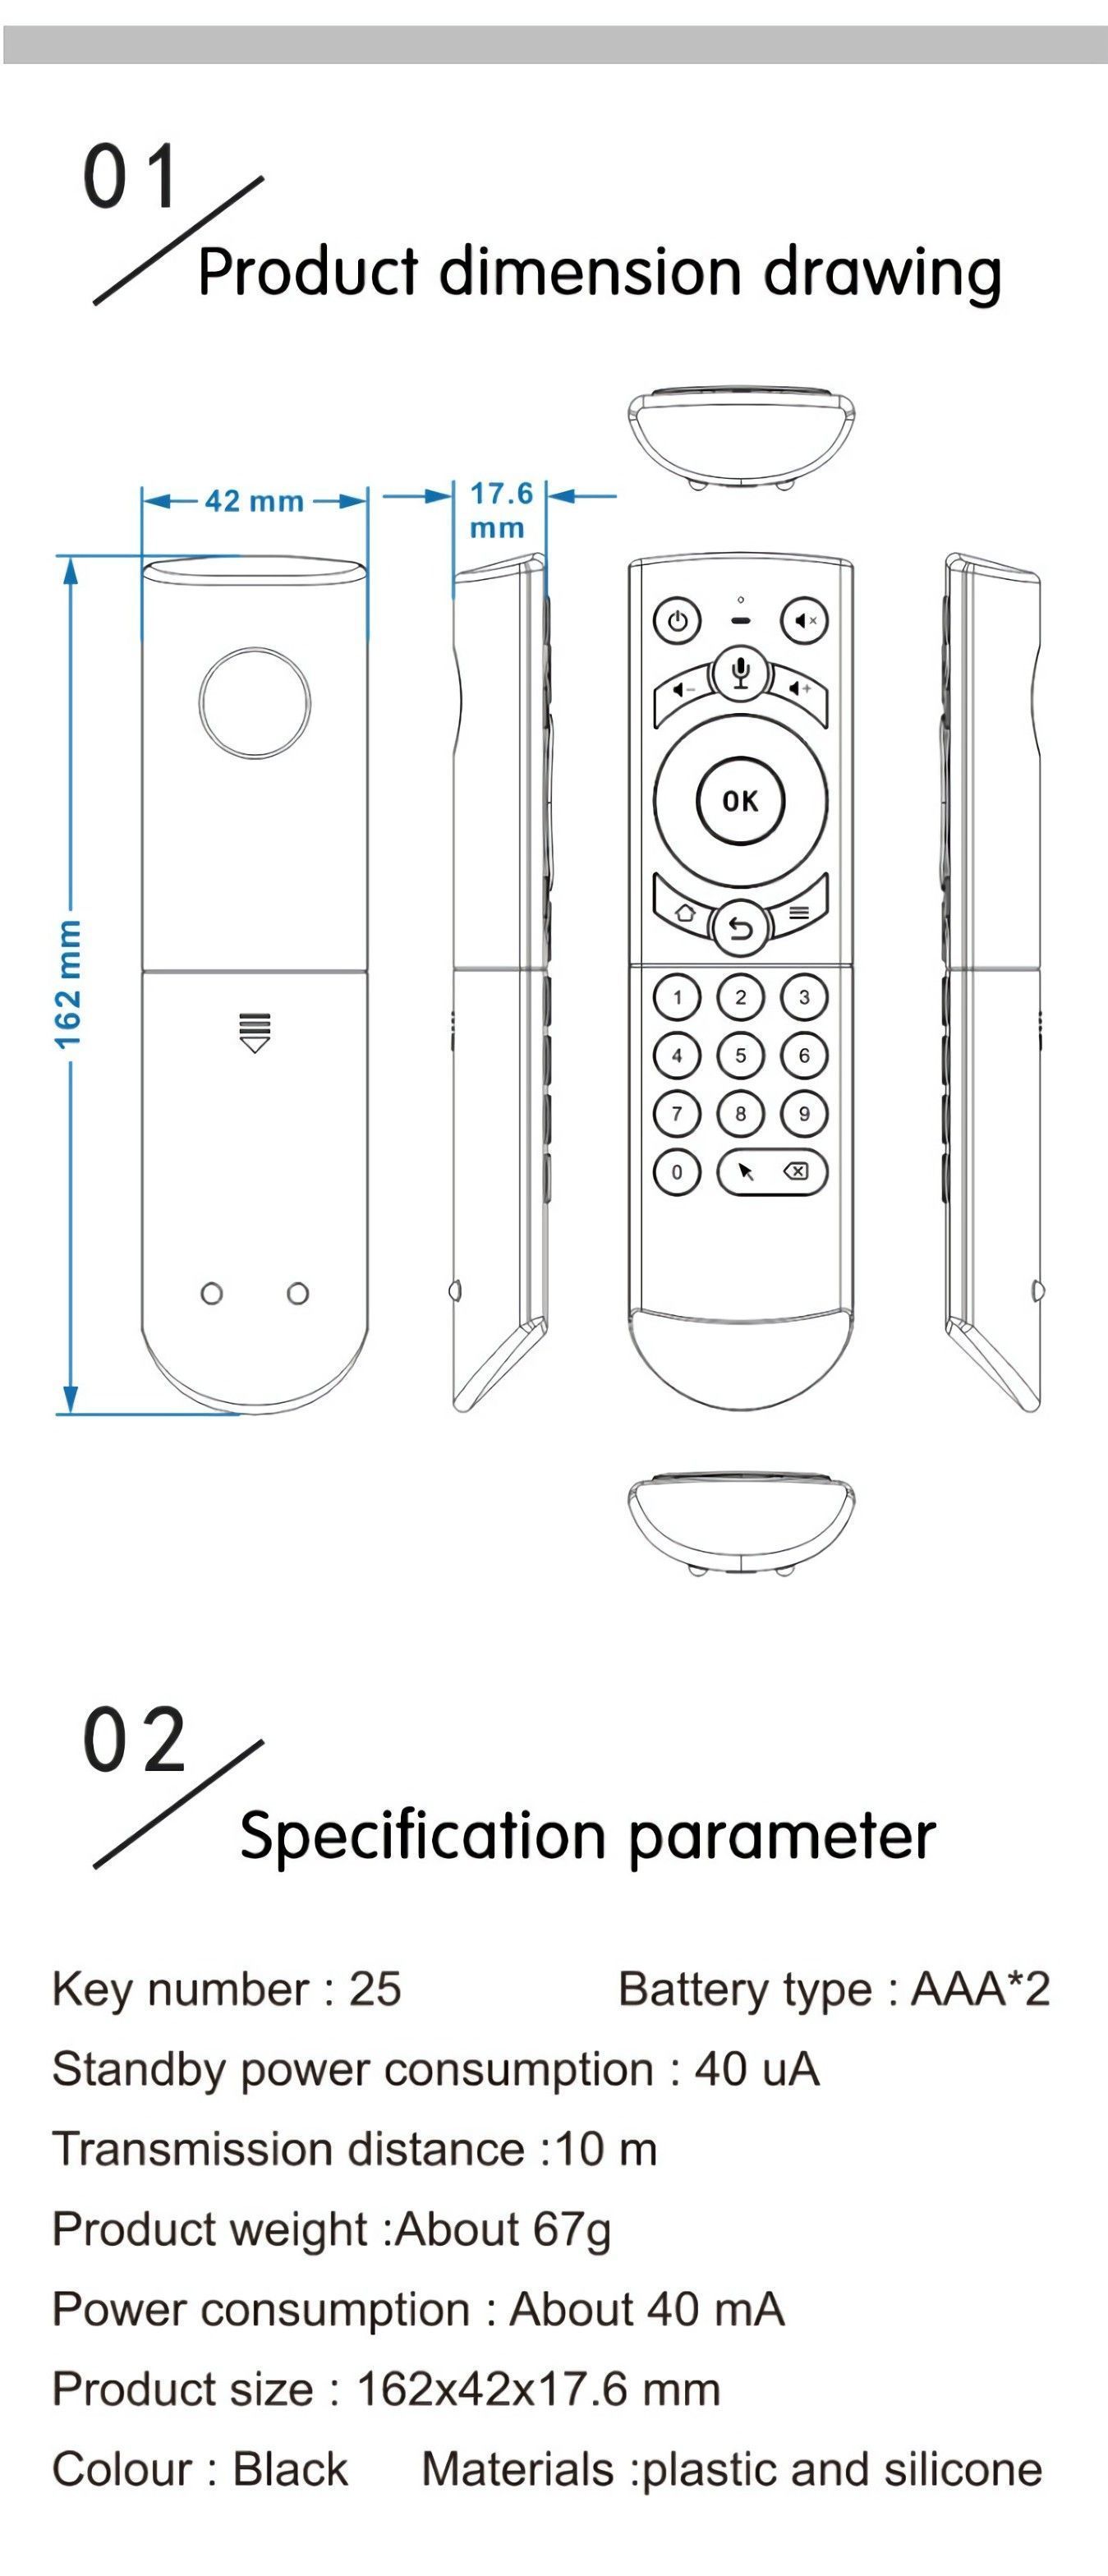 G21-Voice-Remote-Control-Air-Mouse-with-Backlit-Per-Androd-TV-BoxMini-PCTVProjector-1656956